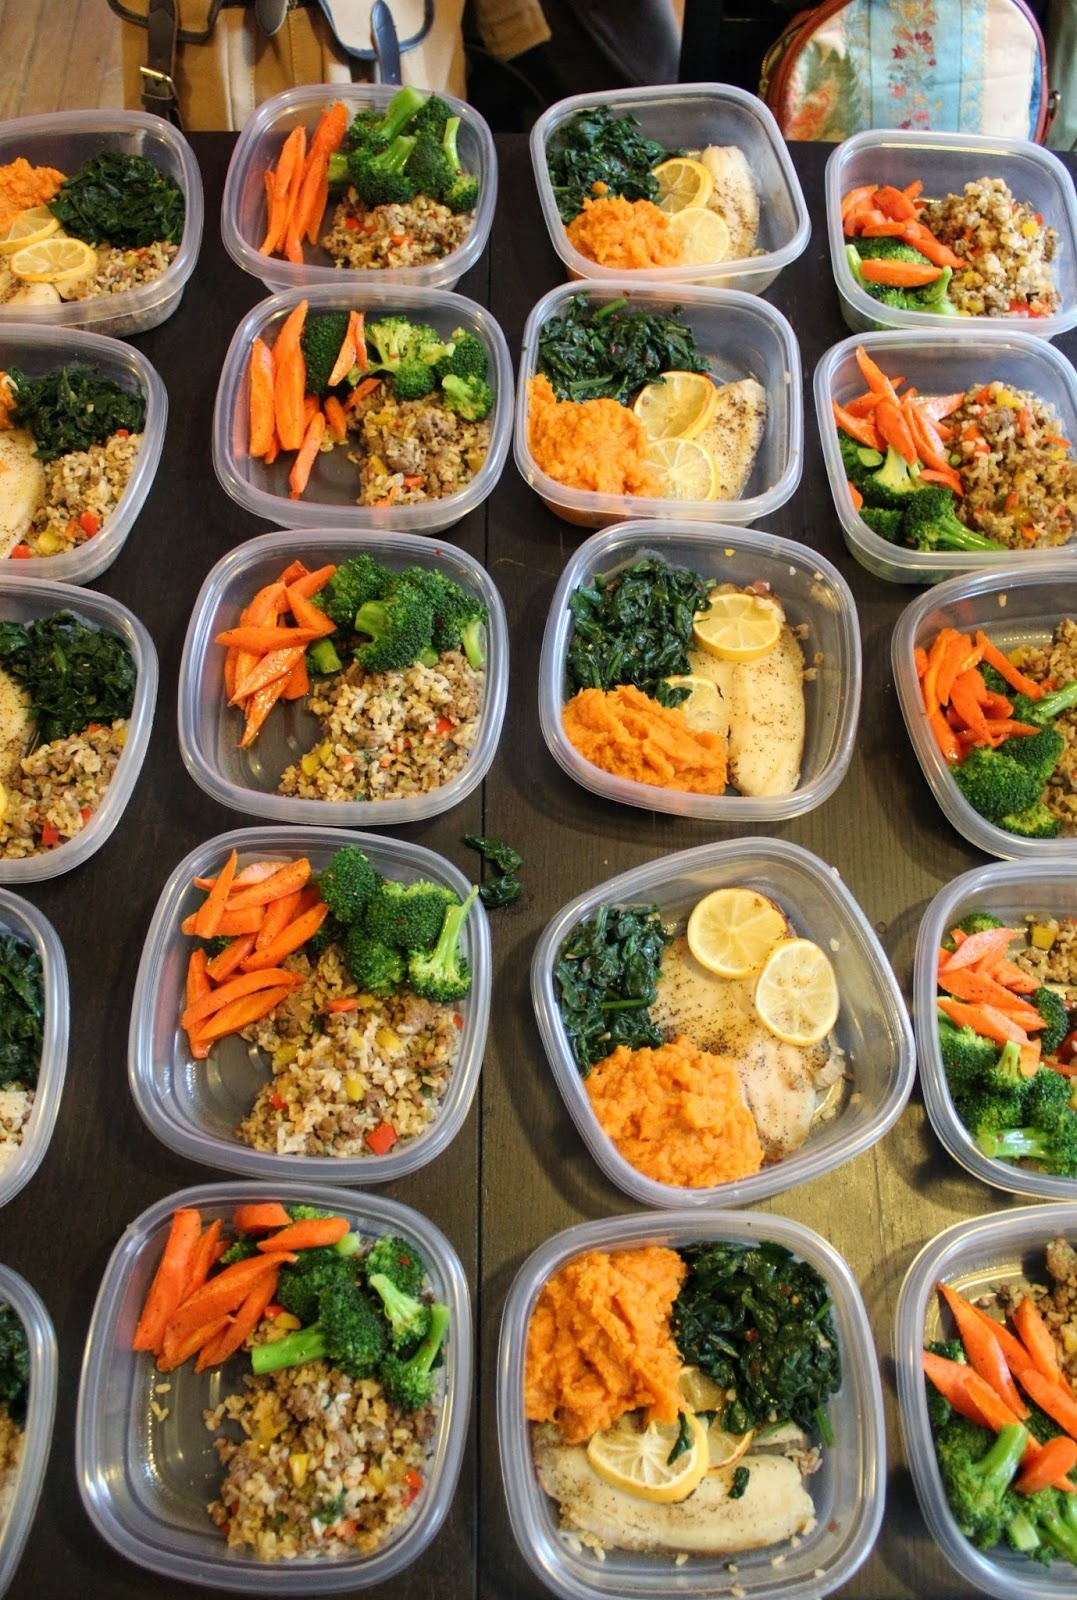 Healthy Meal Prep Dinners
 Healthy Meal Prep Ideas For The WeekWritings and Papers